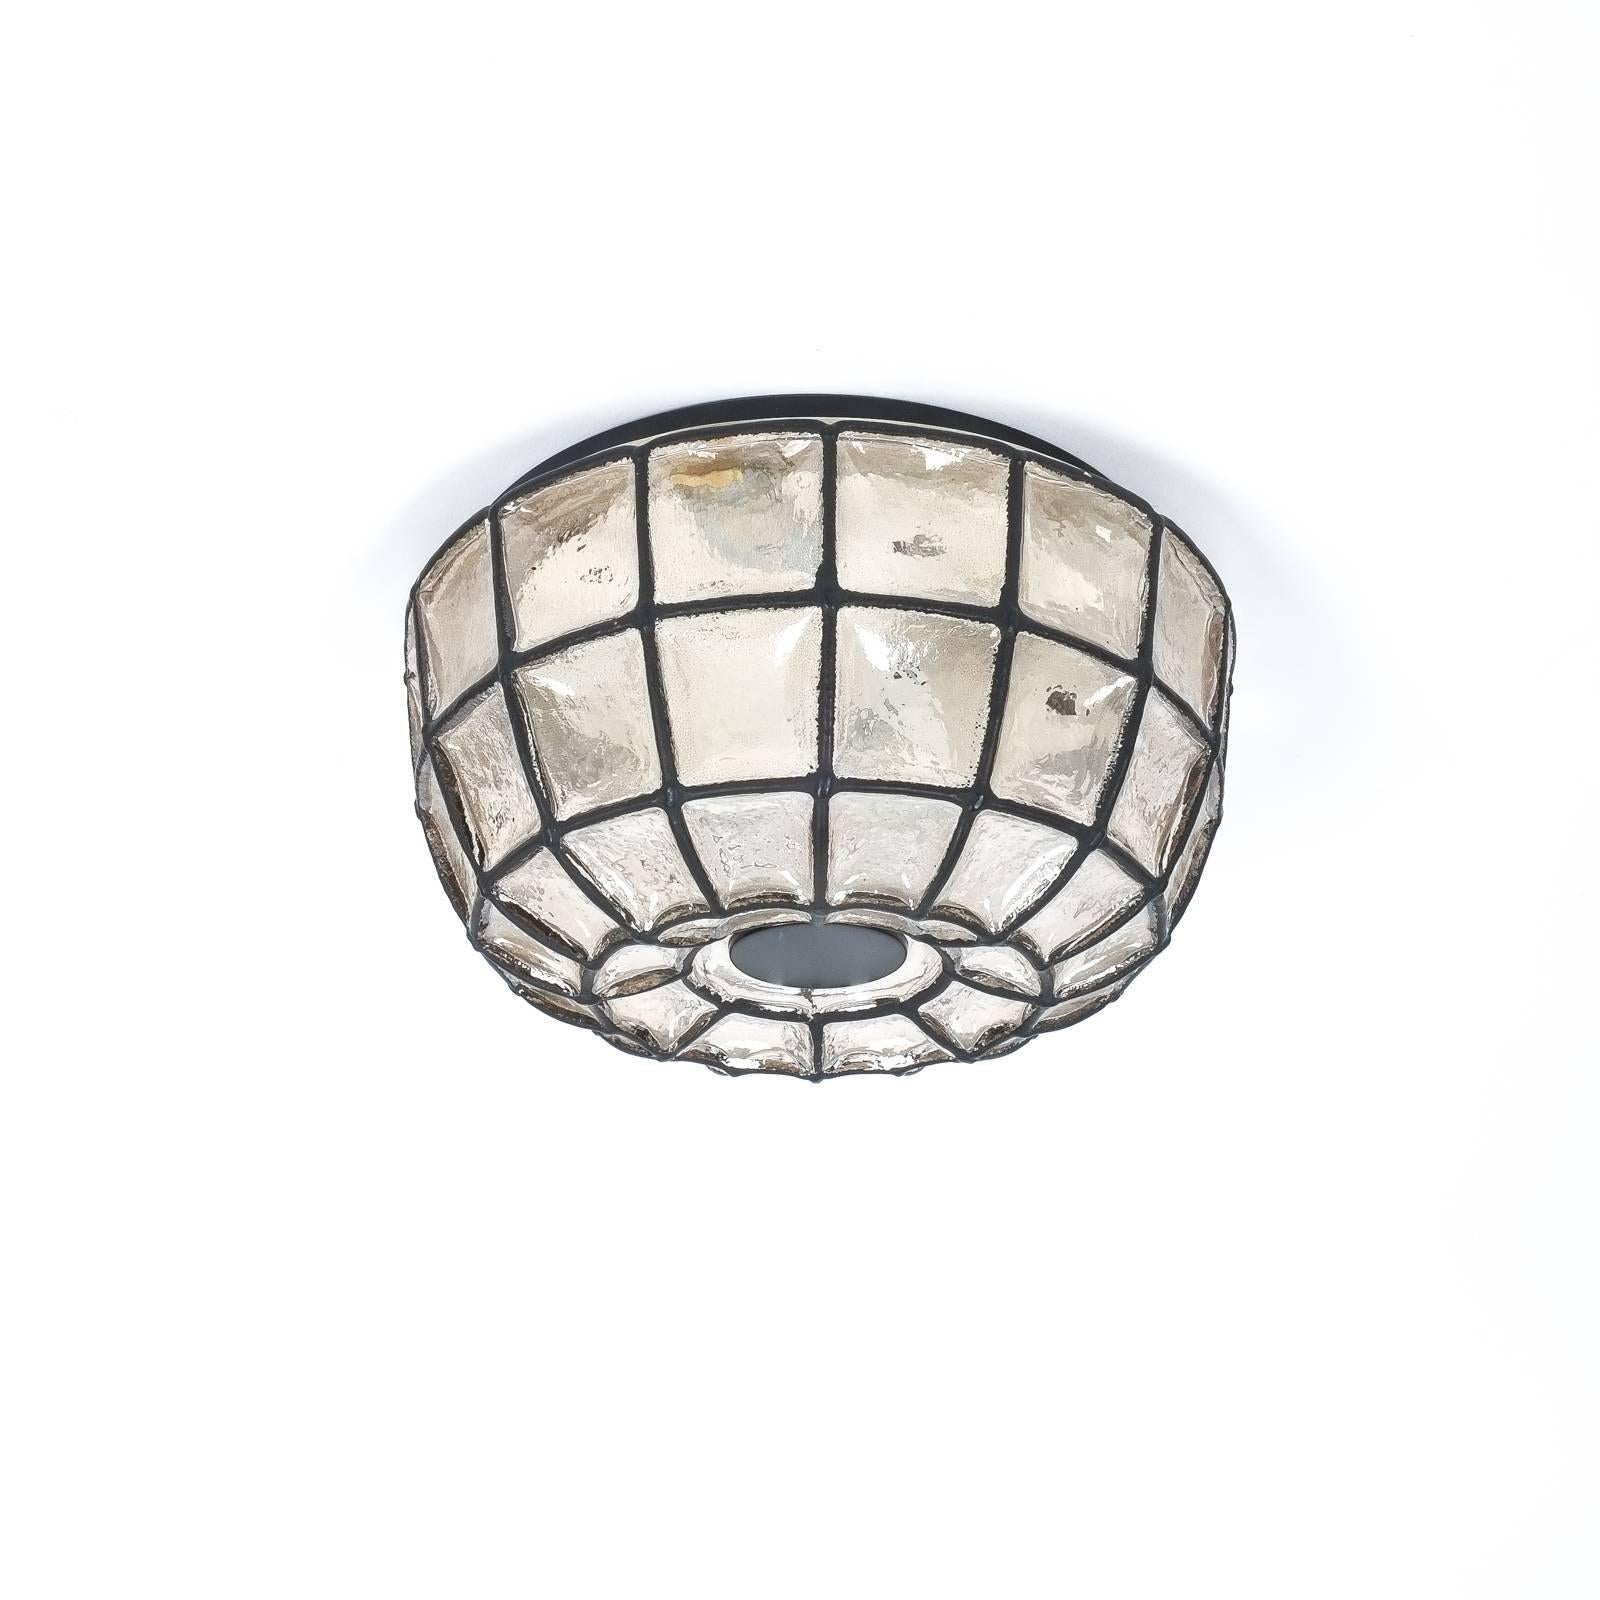 Beautiful 'iron' and glass honeycomb ceiling fixture by Limburg, Germany. This fixture features a thick clear glass with black grid accents. It holds one large bulb with 60W. The condition is excellent, it has been newly rewired (110-220V) 

We have